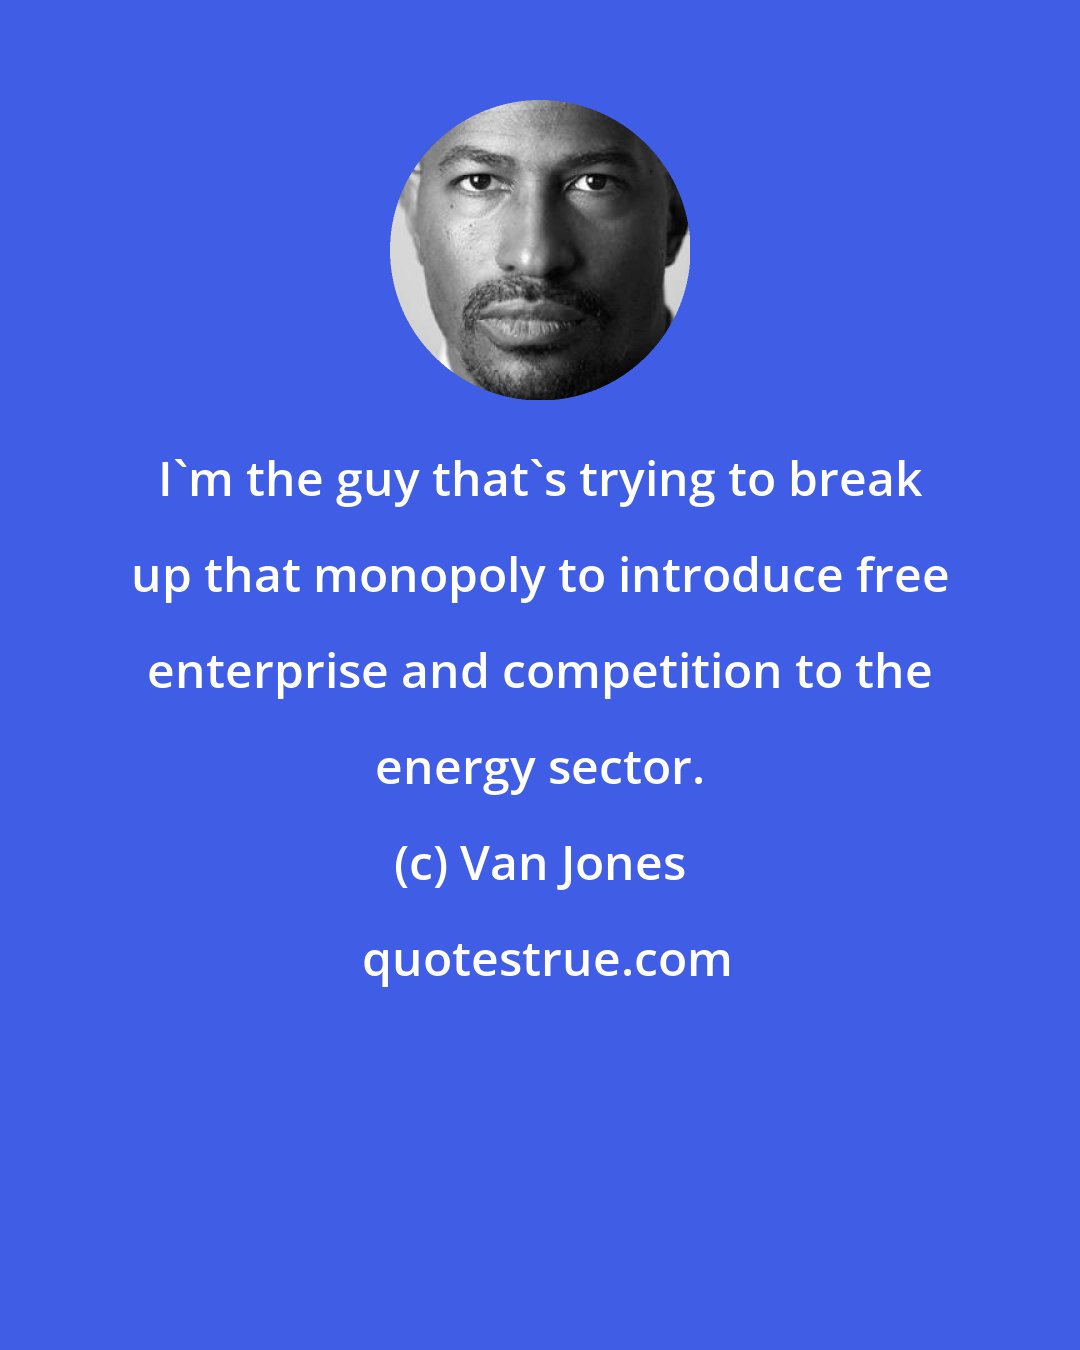 Van Jones: I'm the guy that's trying to break up that monopoly to introduce free enterprise and competition to the energy sector.